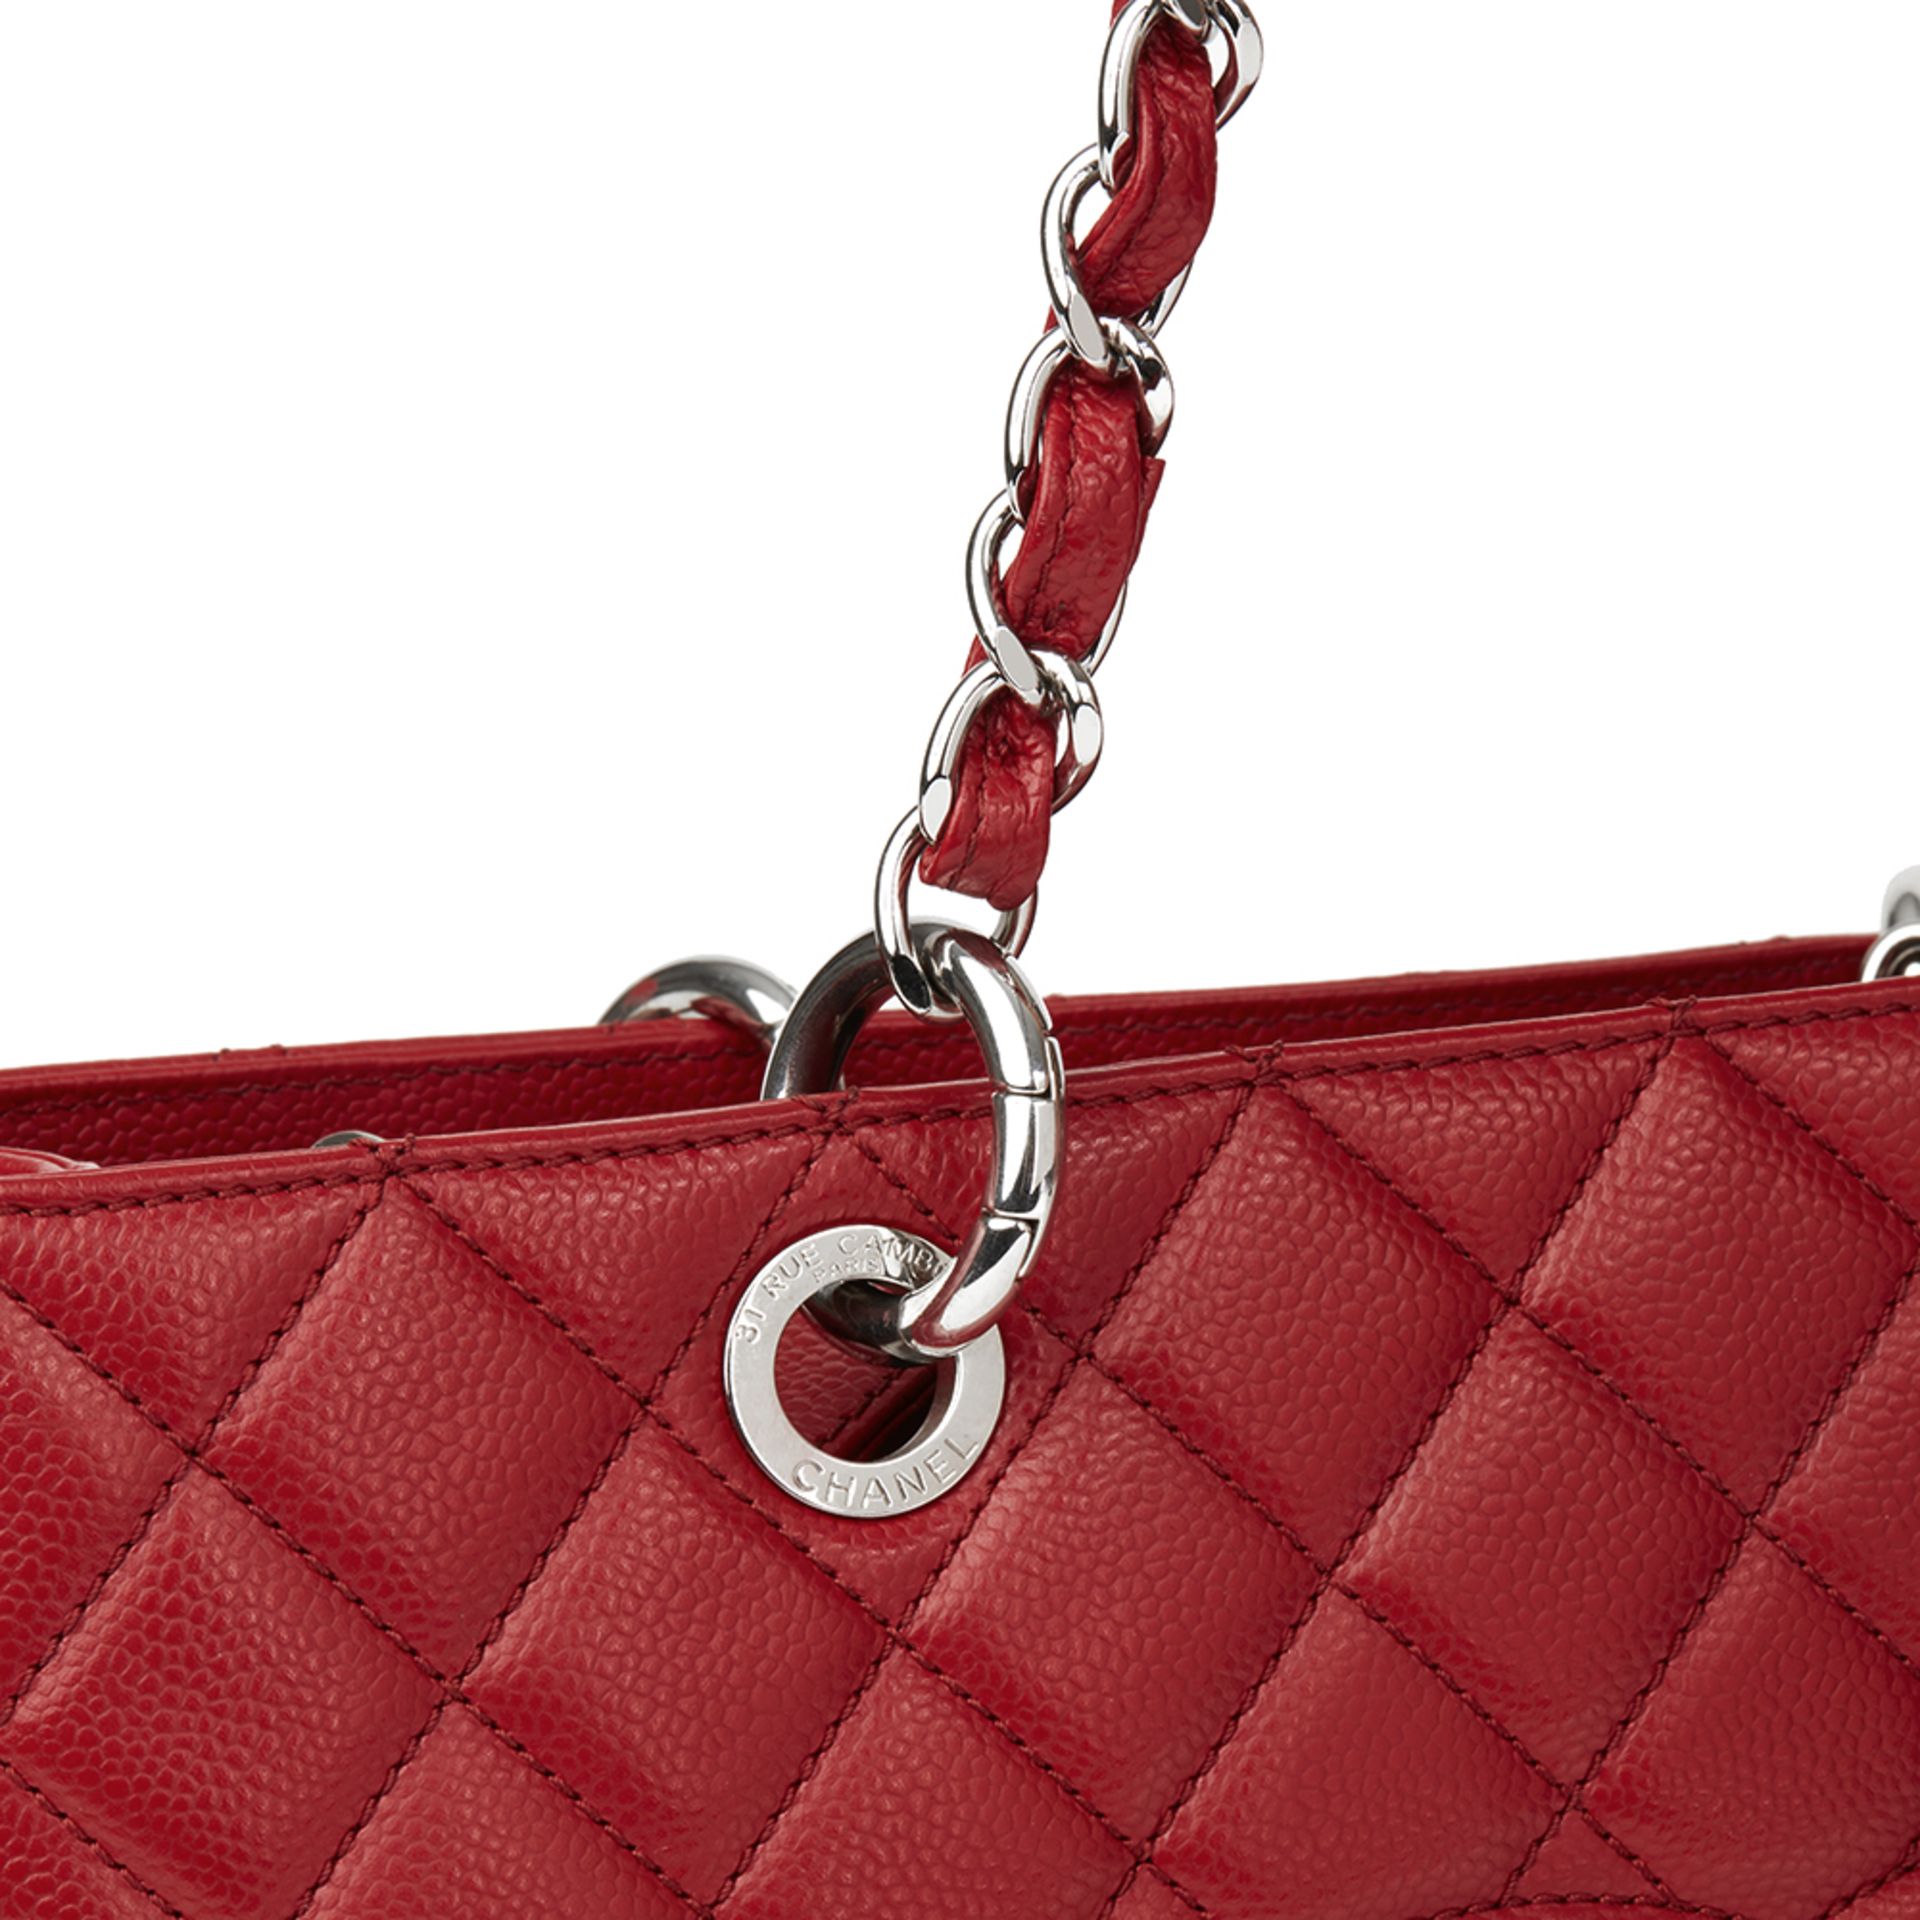 Chanel Red Quilted Caviar Leather Grand bidping Tote - Image 7 of 10